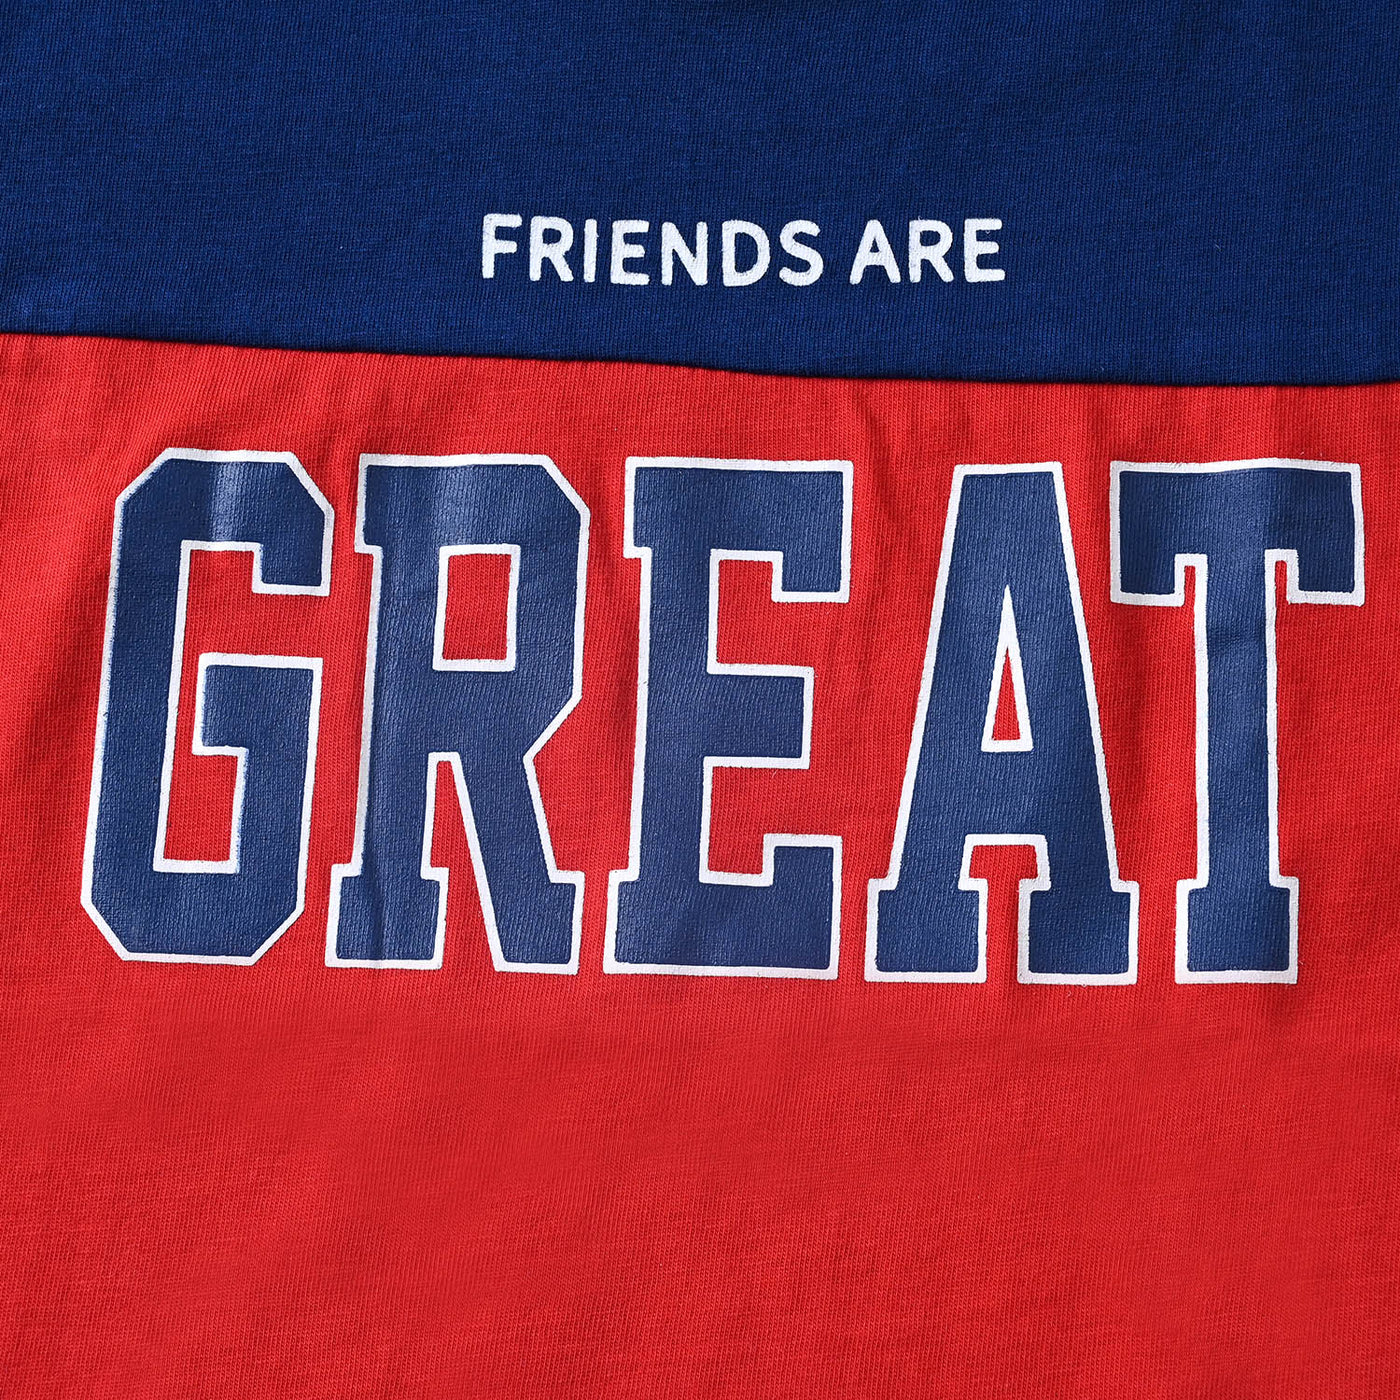 Boys Cotton Jersey T-Shirt H/S Friends Are Great-Blue